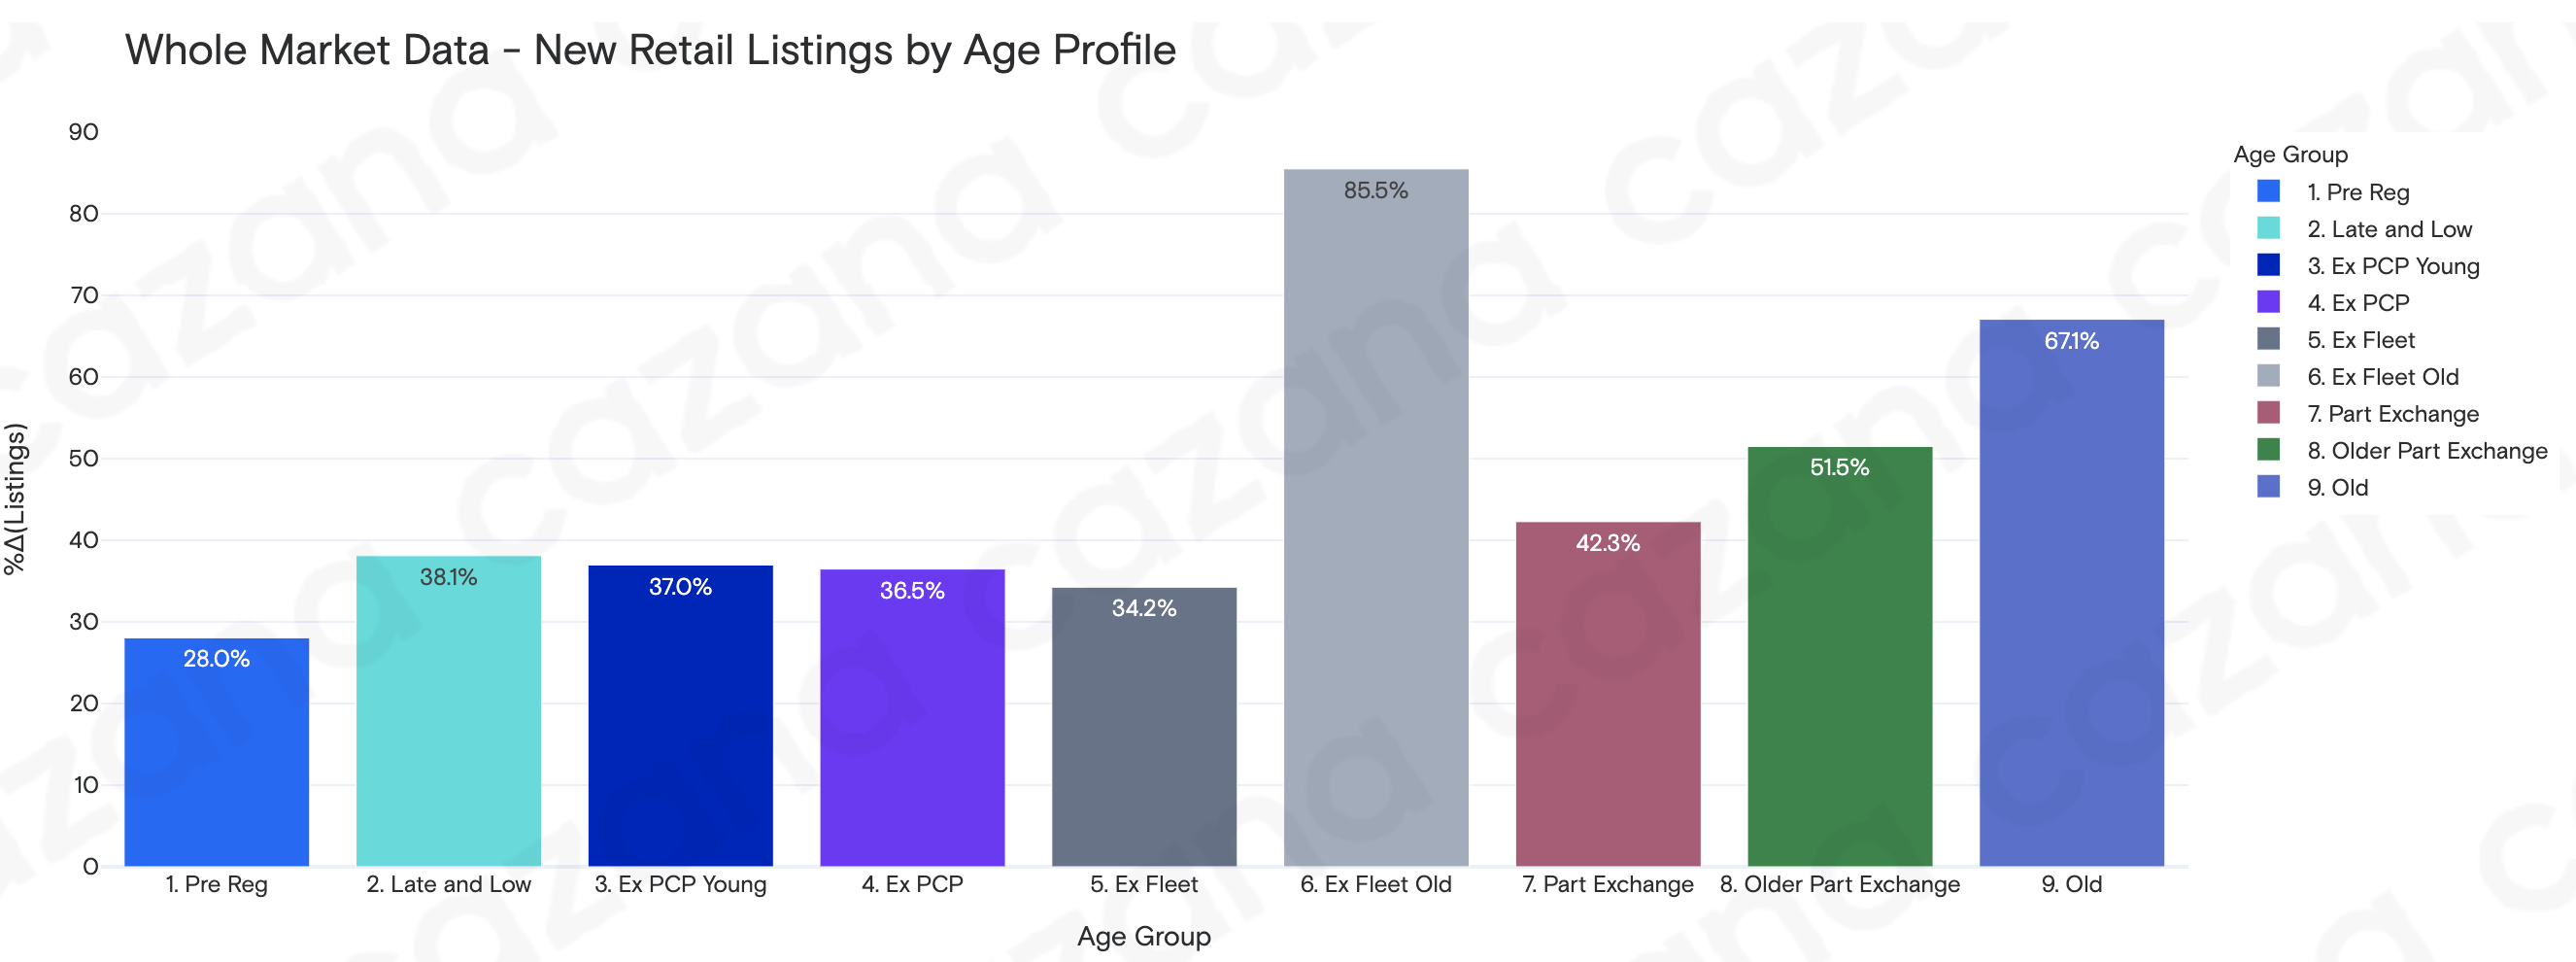 New retail listings by age profile - 10.08.21